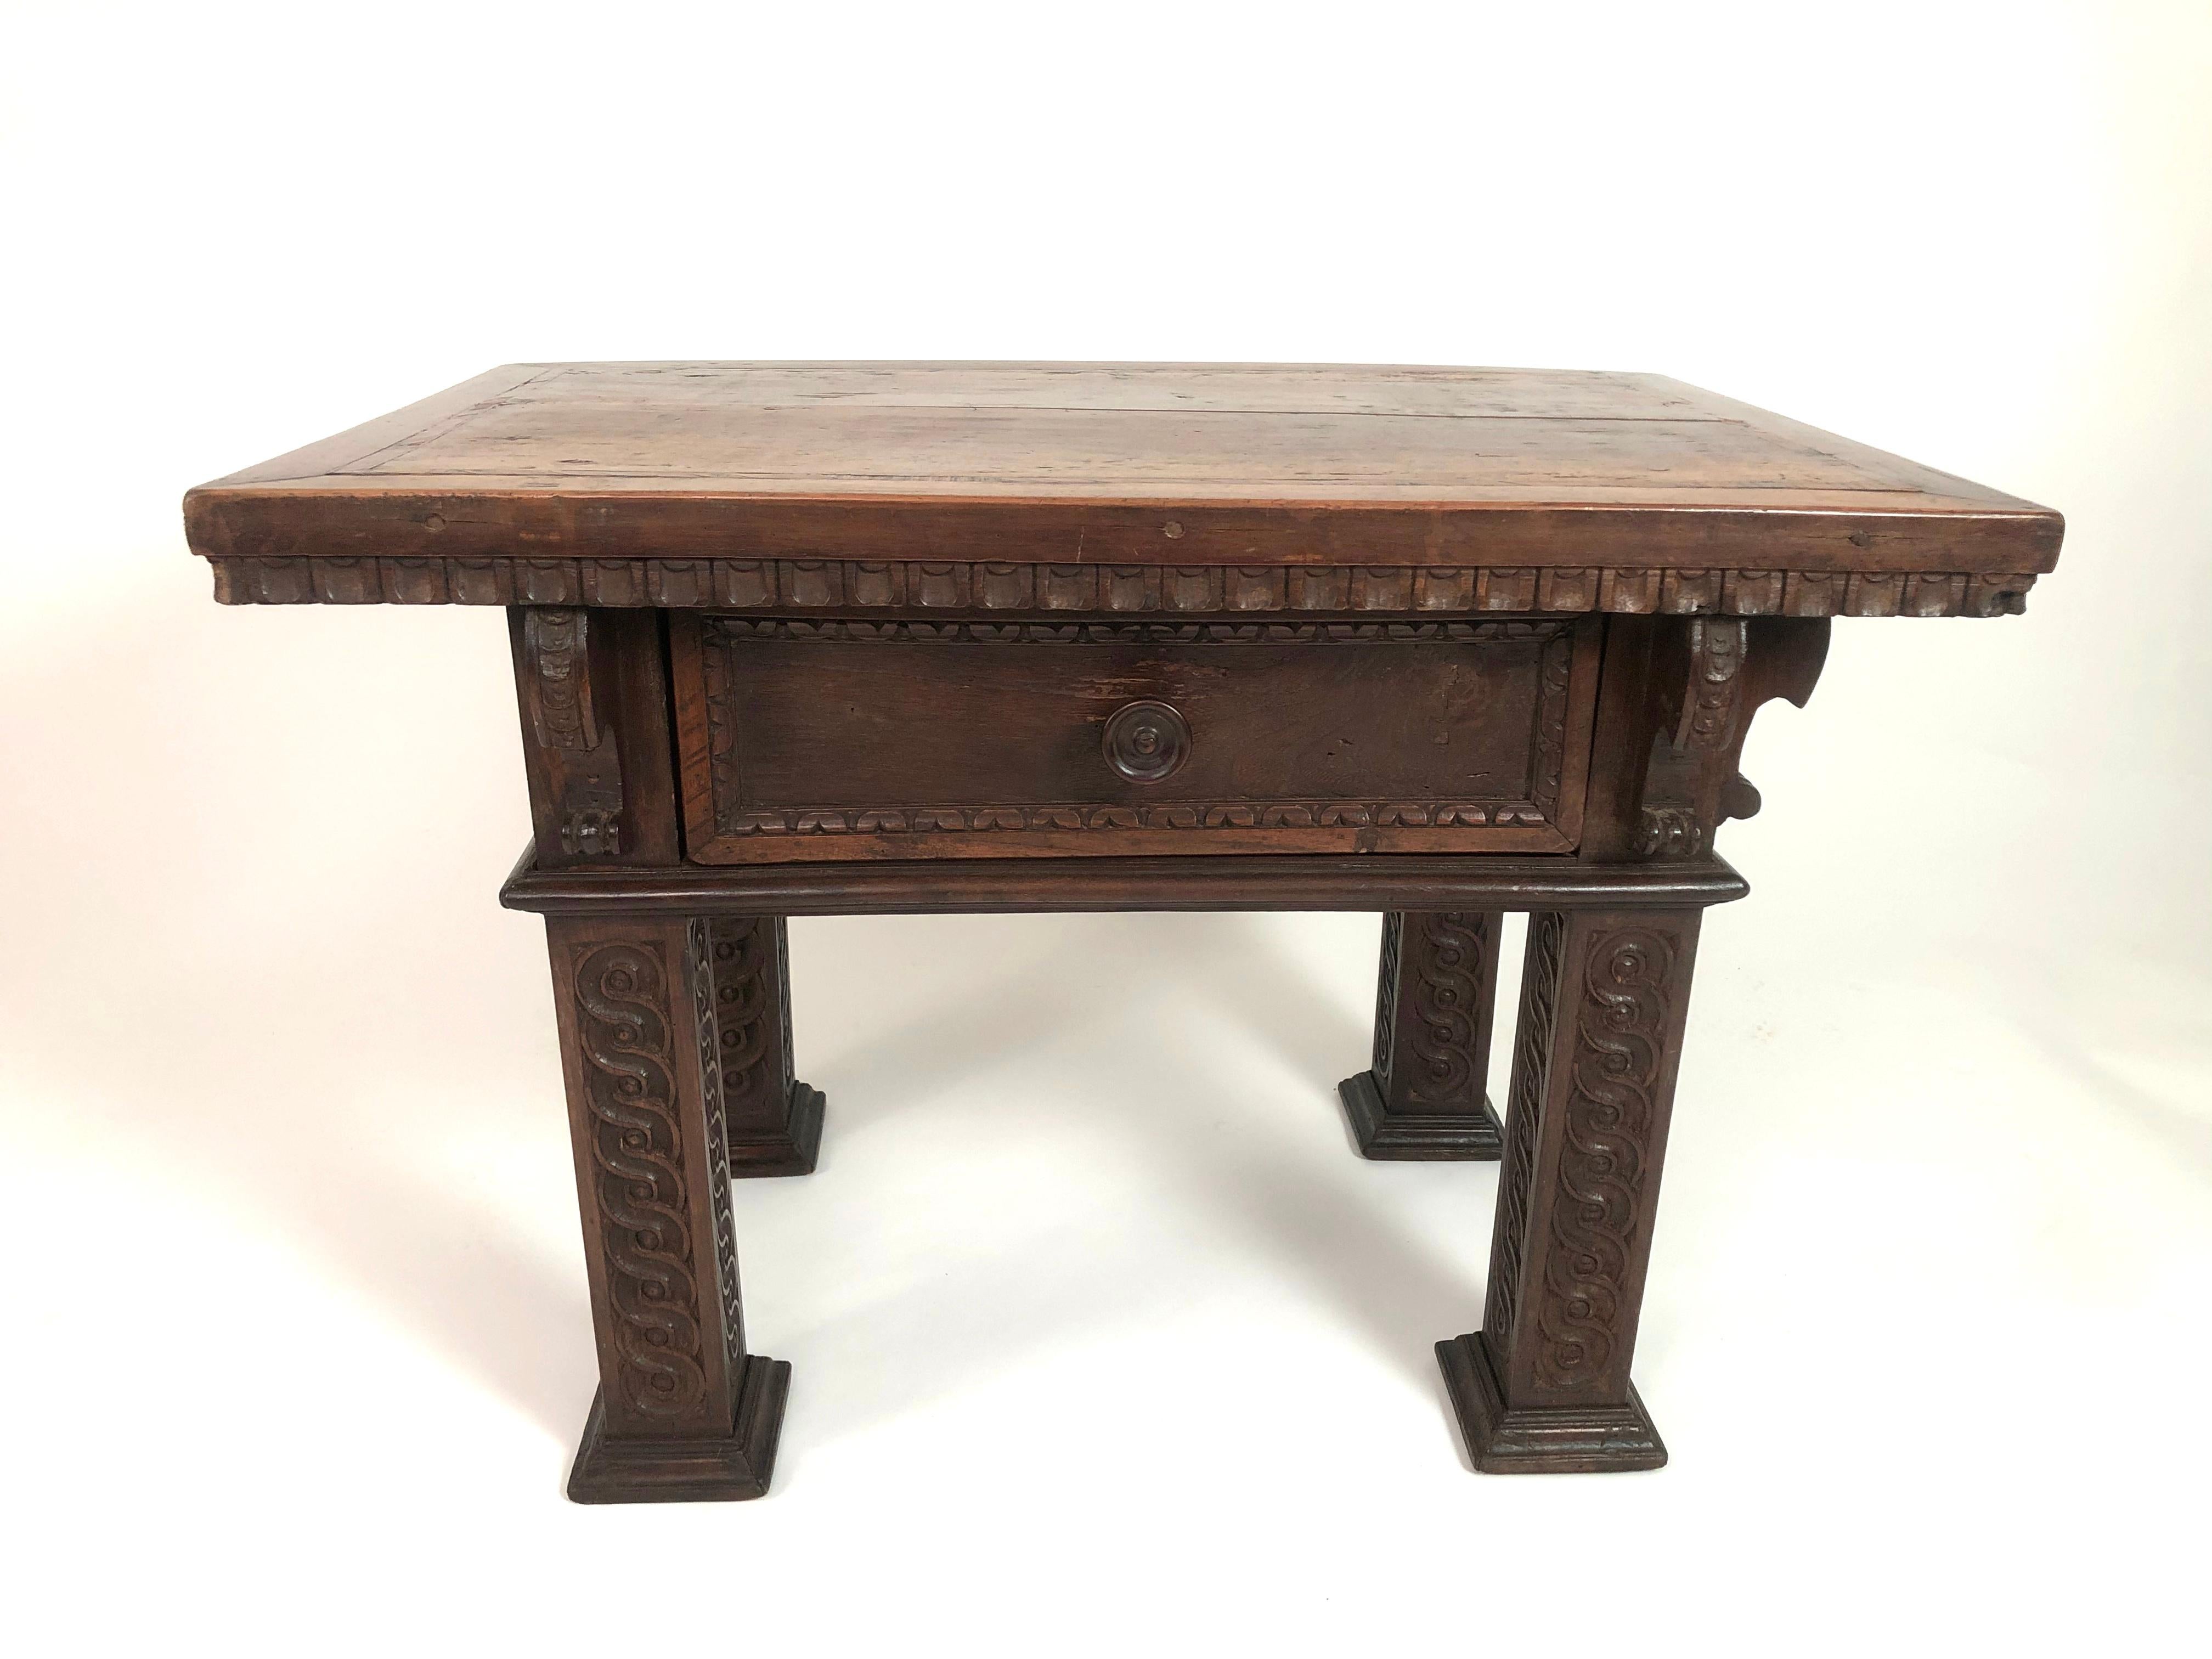 A well made and beautifully designed Italian Renaissance Revival carved oak and walnut side or coffee table, of rectangular form, the inlaid top over a single deep drawer, supported by four square section legs carved with graphic guilloche pattern.